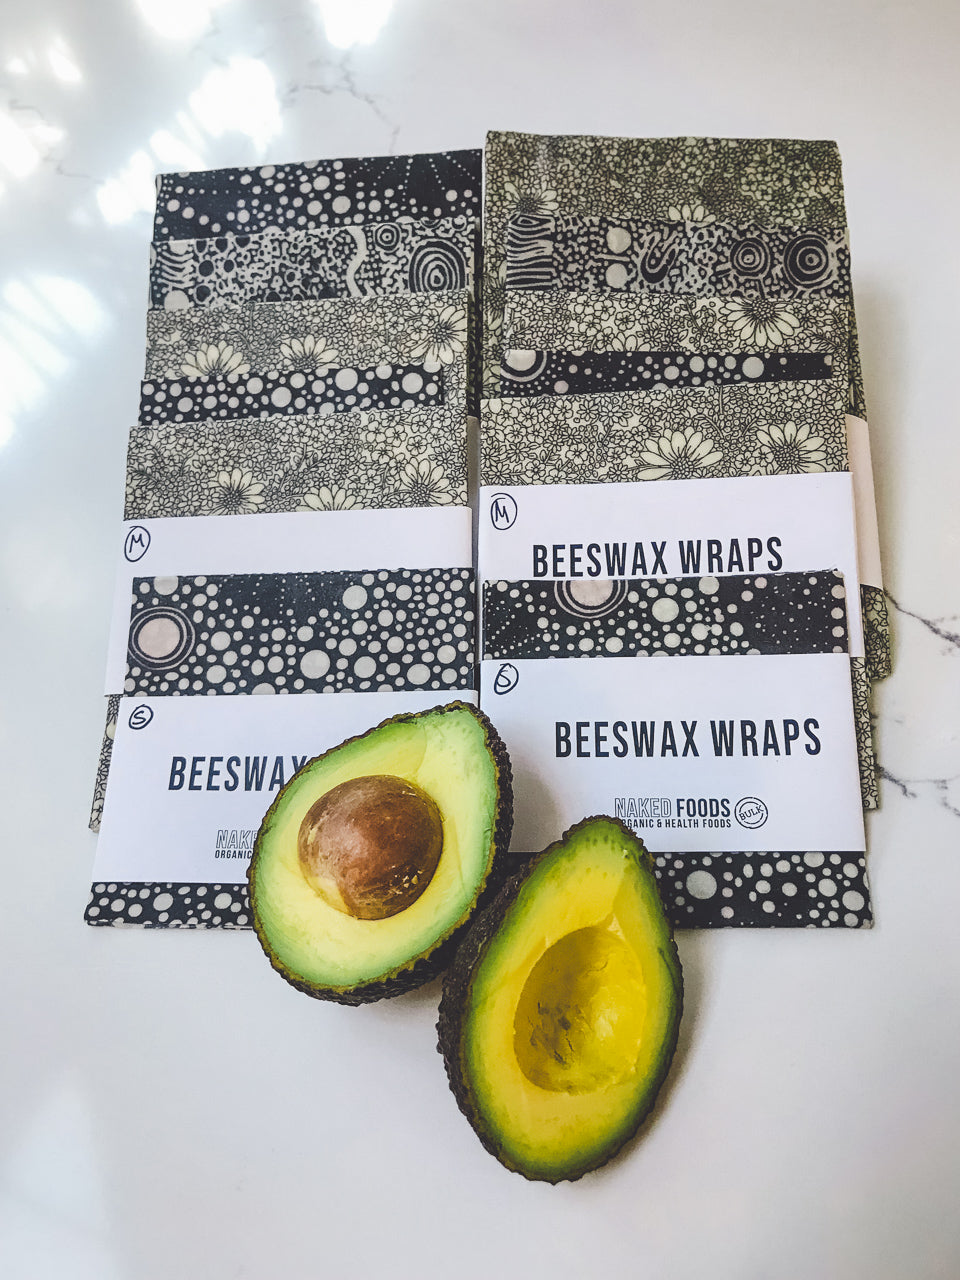 naked-foods-beeswax-wraps